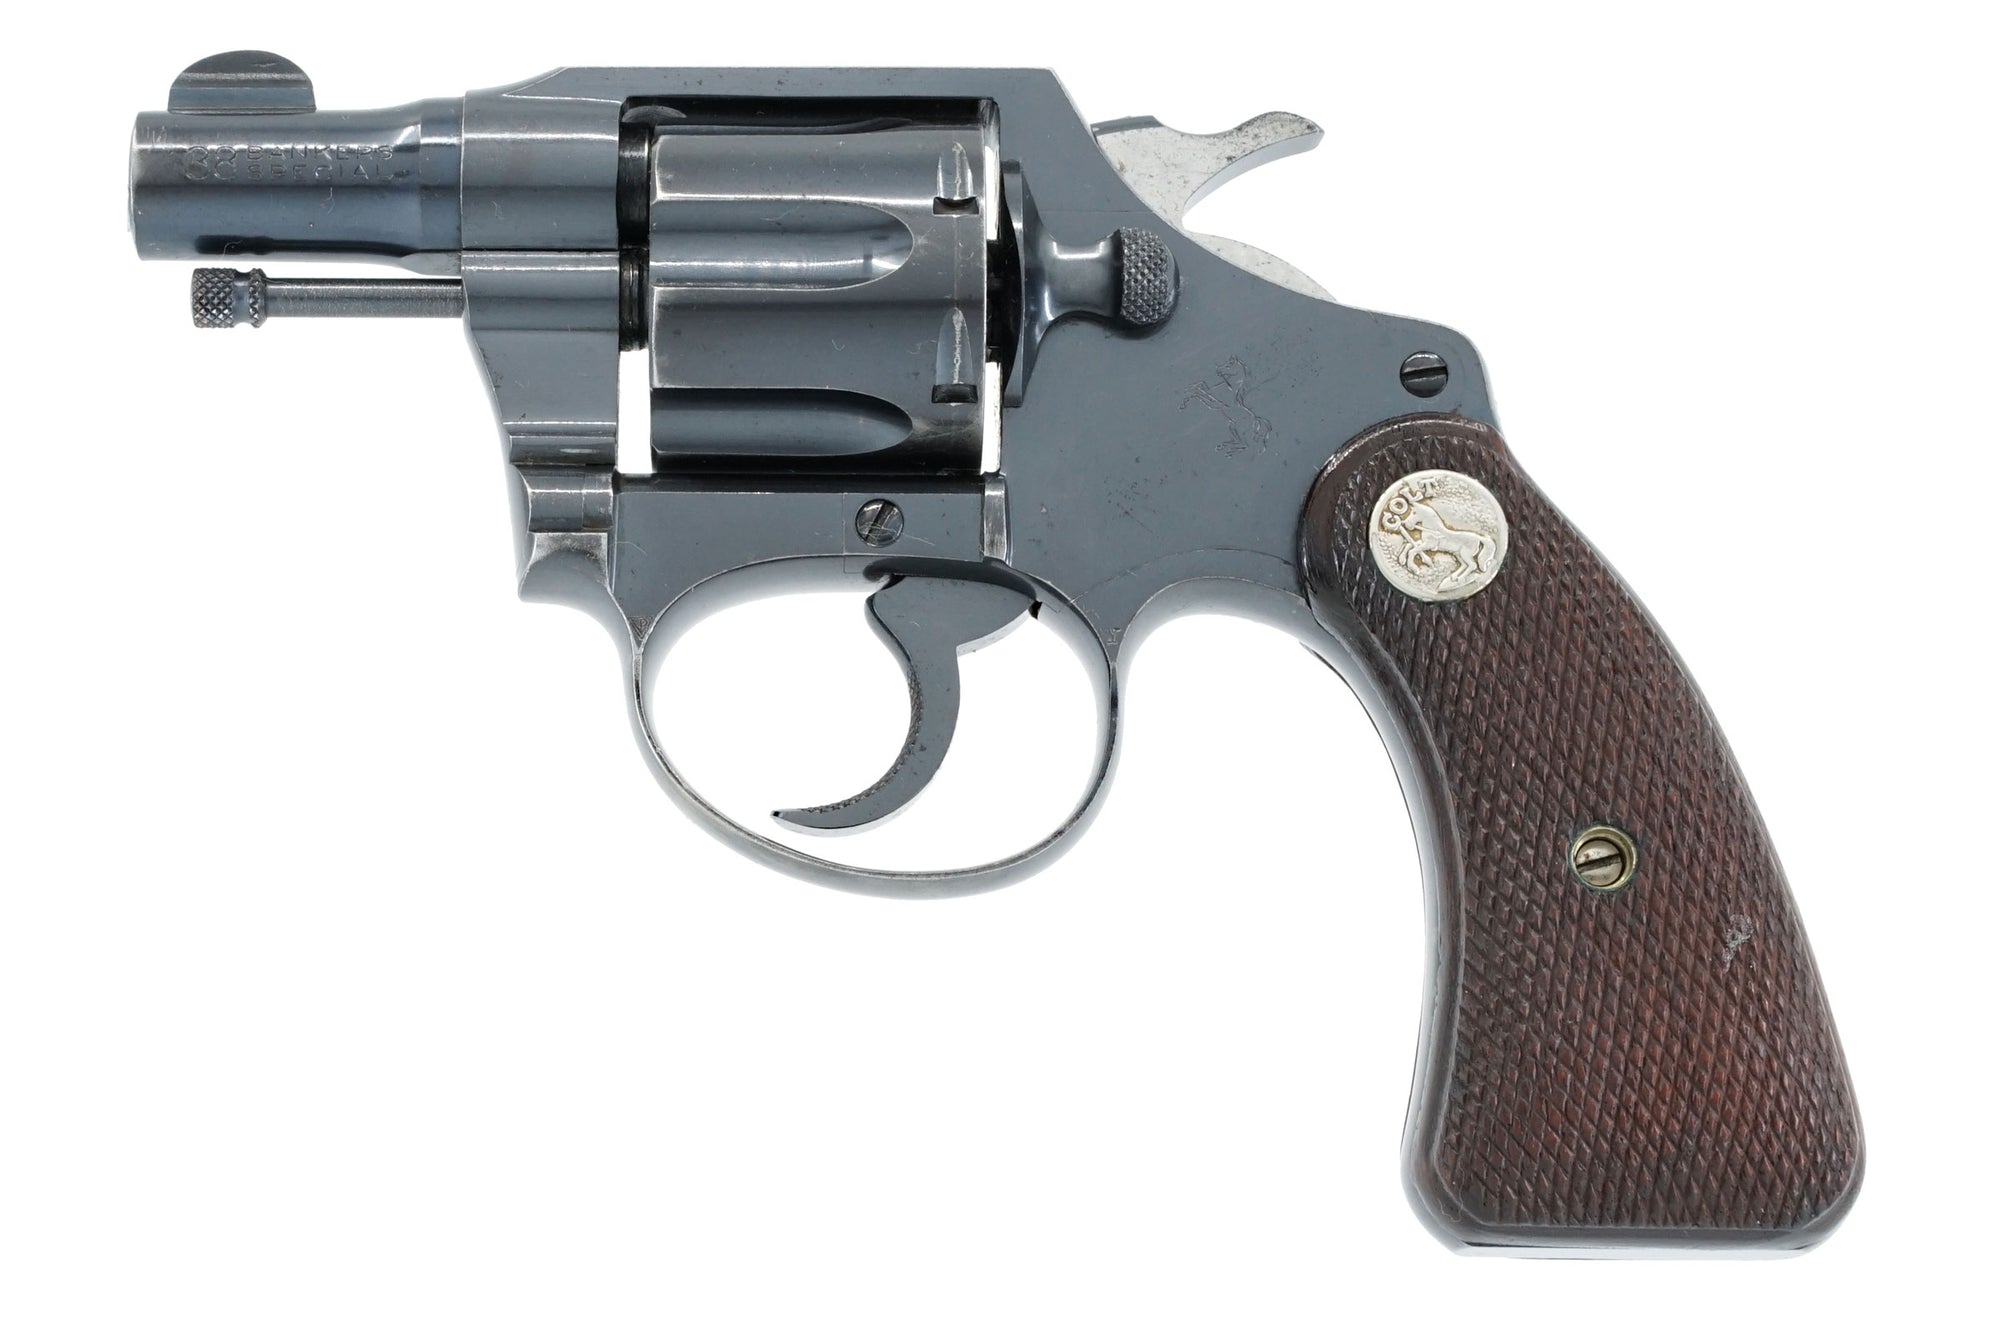 Colt Bankers Special 38 SN:374440 MFG:1941 - Clinton Prison